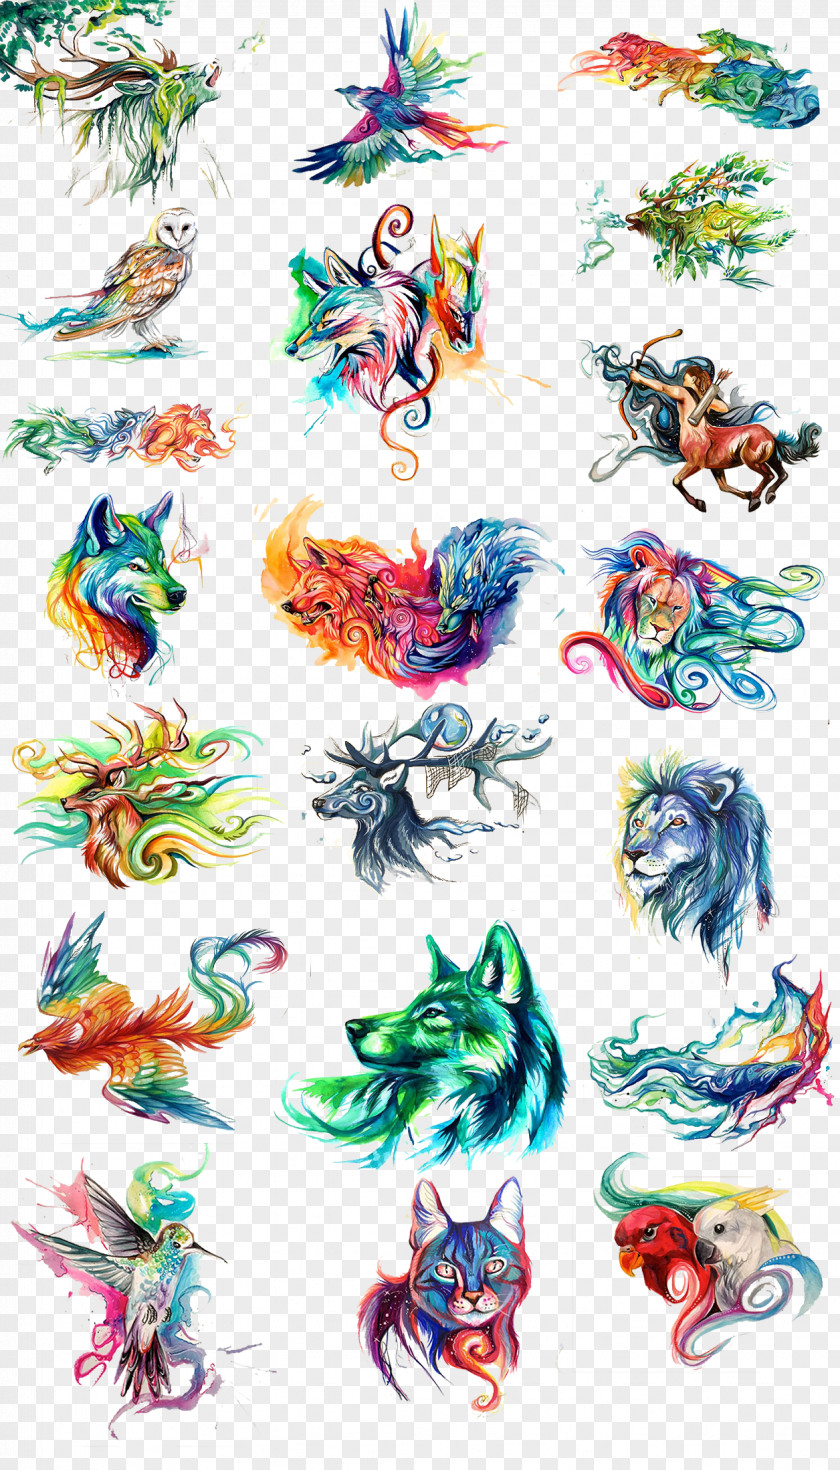 Watercolor Painted Animals Painting Download PNG